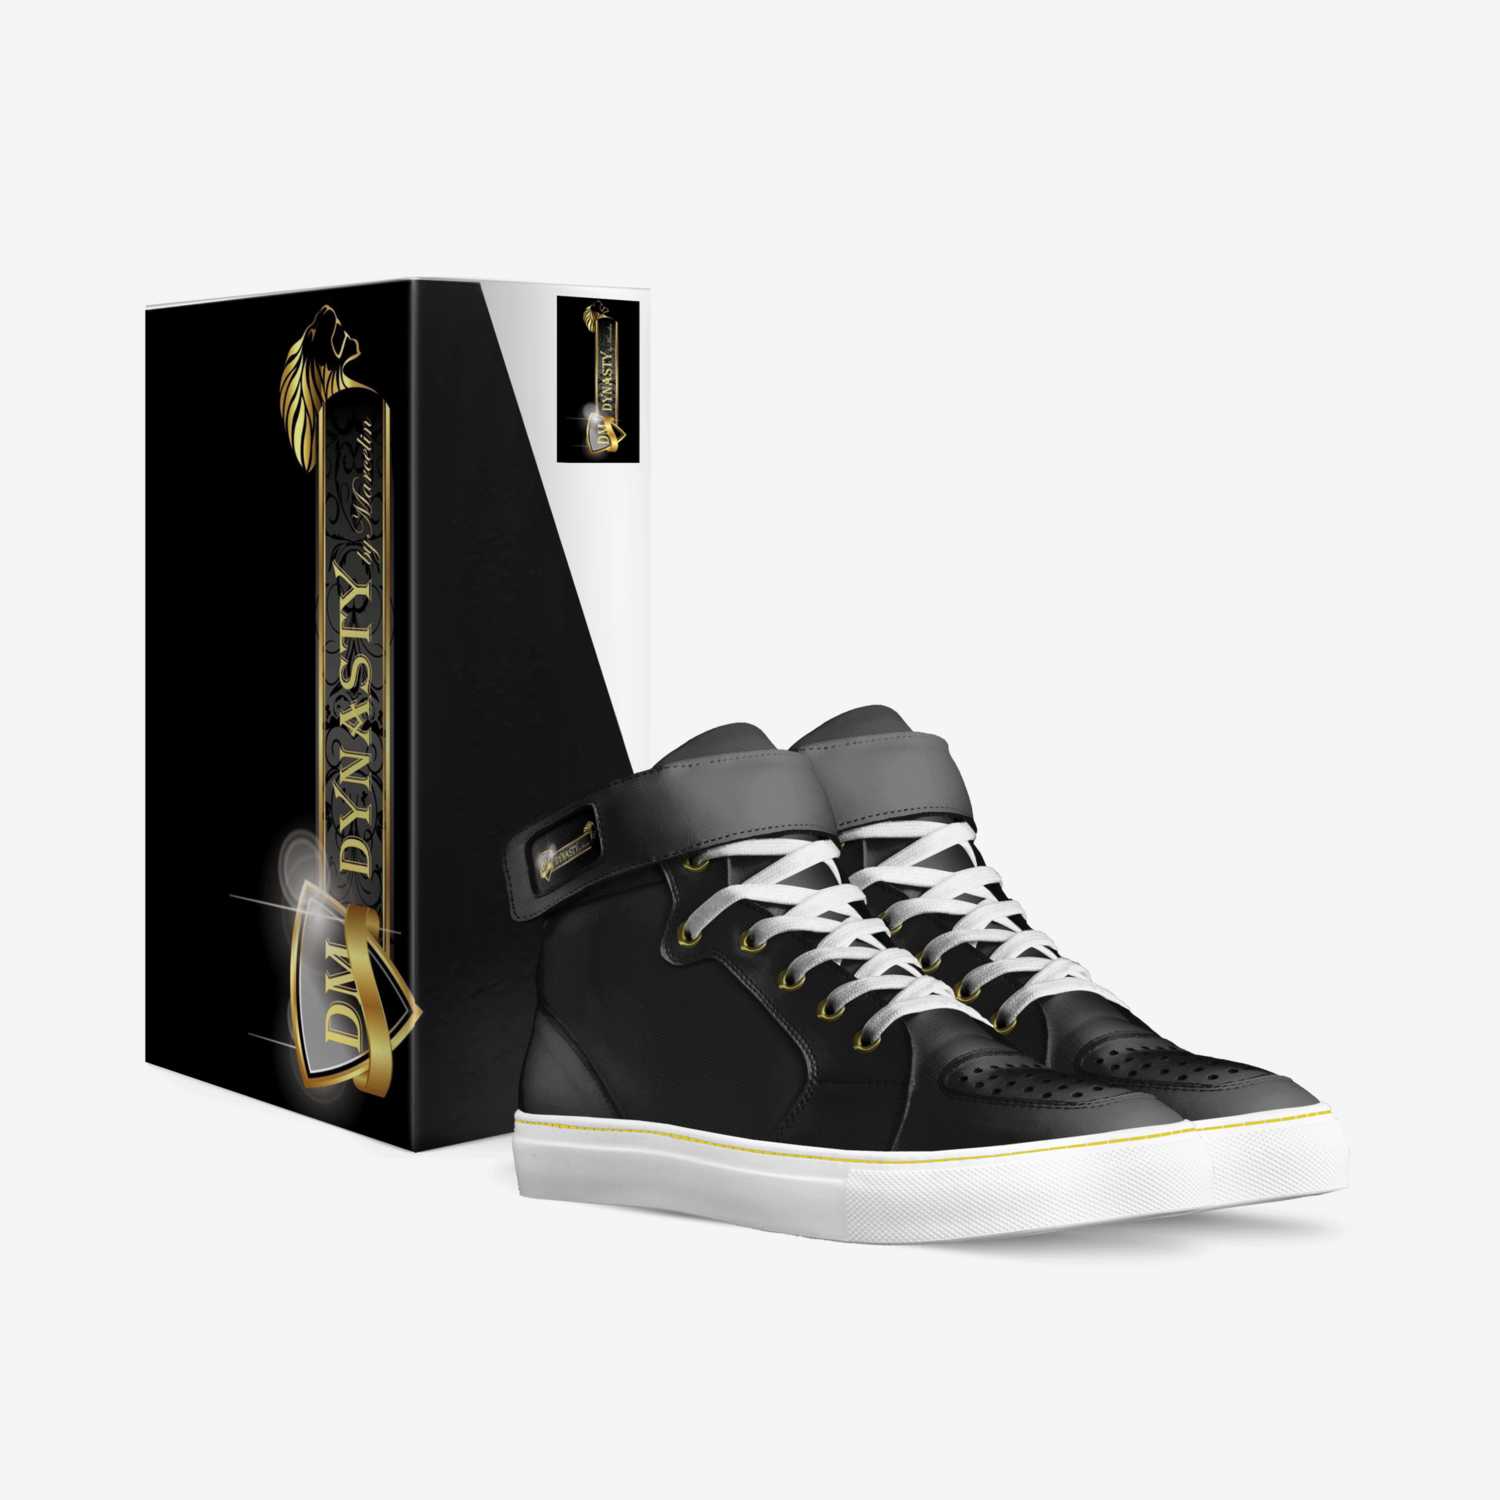 Dynasty by M custom made in Italy shoes by Steevens Marcelin | Box view